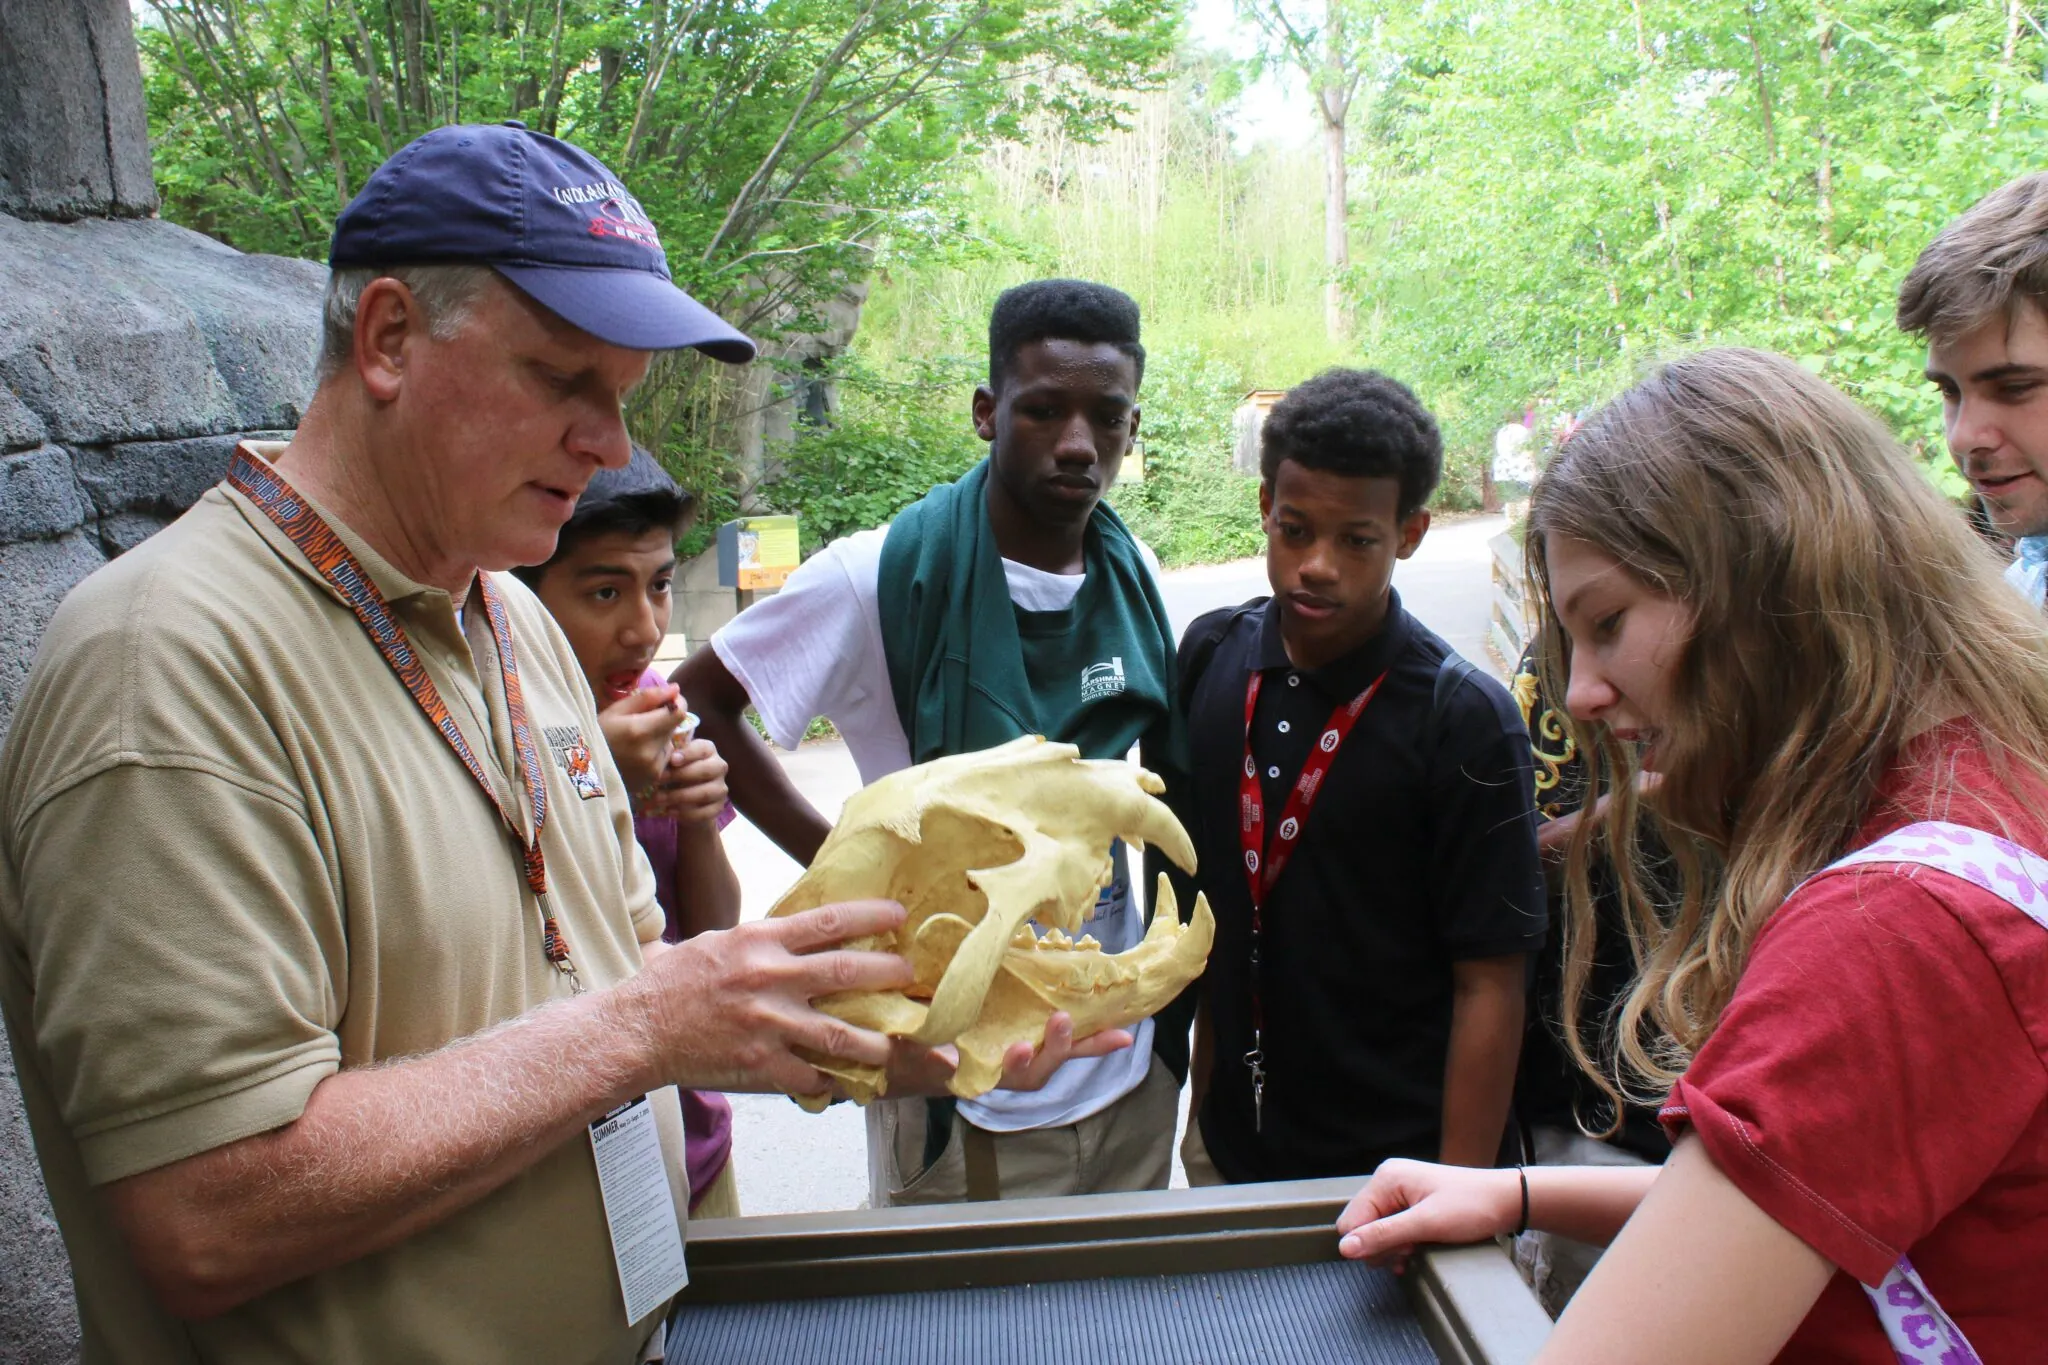 Teenagers are gathered around a zoo volunteer who is showing them a replica skull of a tiger.